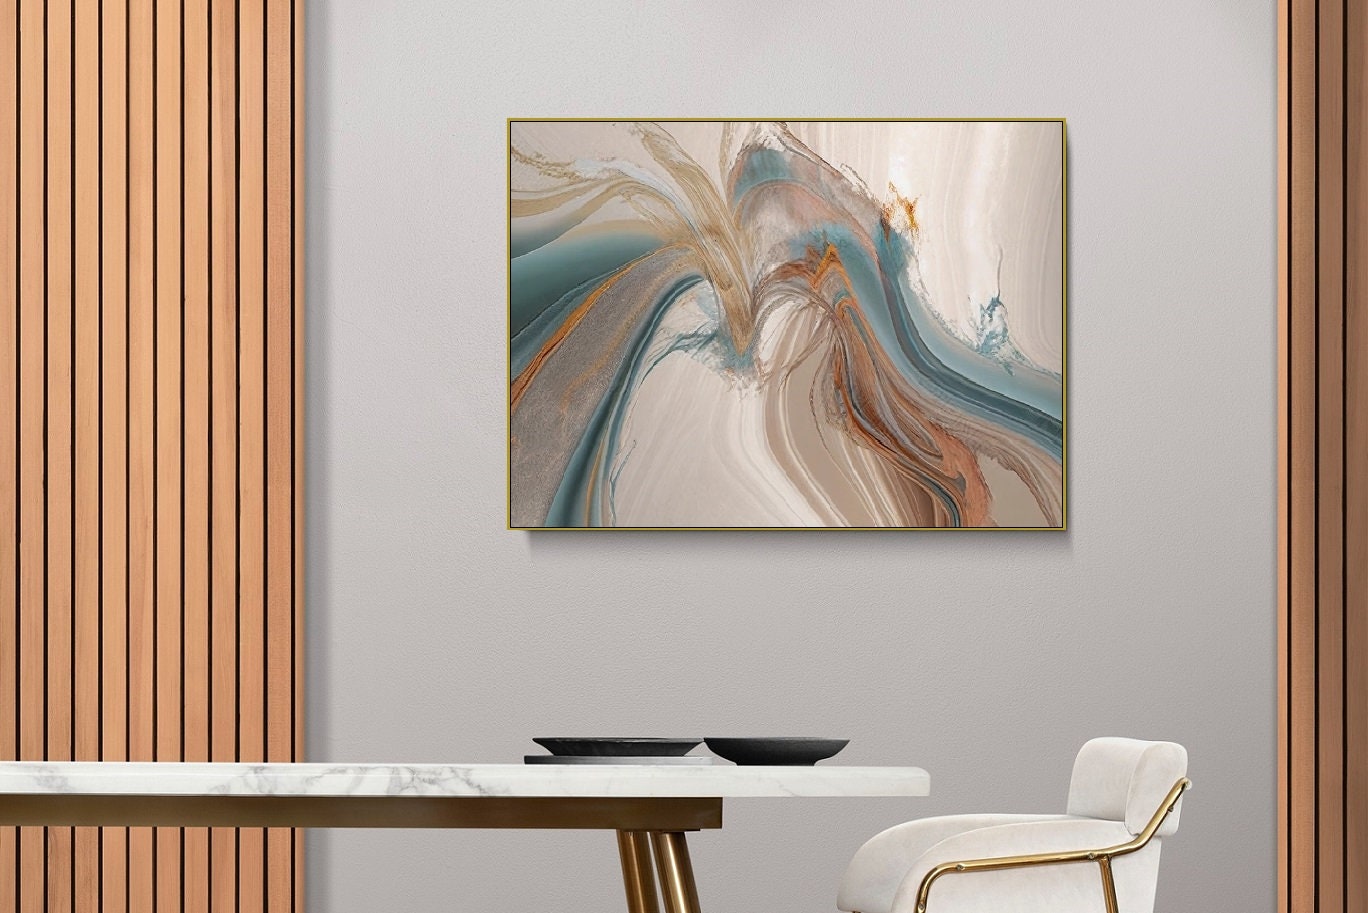 Large abstract wall art, large float frame wall art, blue beige canvas painting, contemporary framed wall art, minimalist bedroom artwork